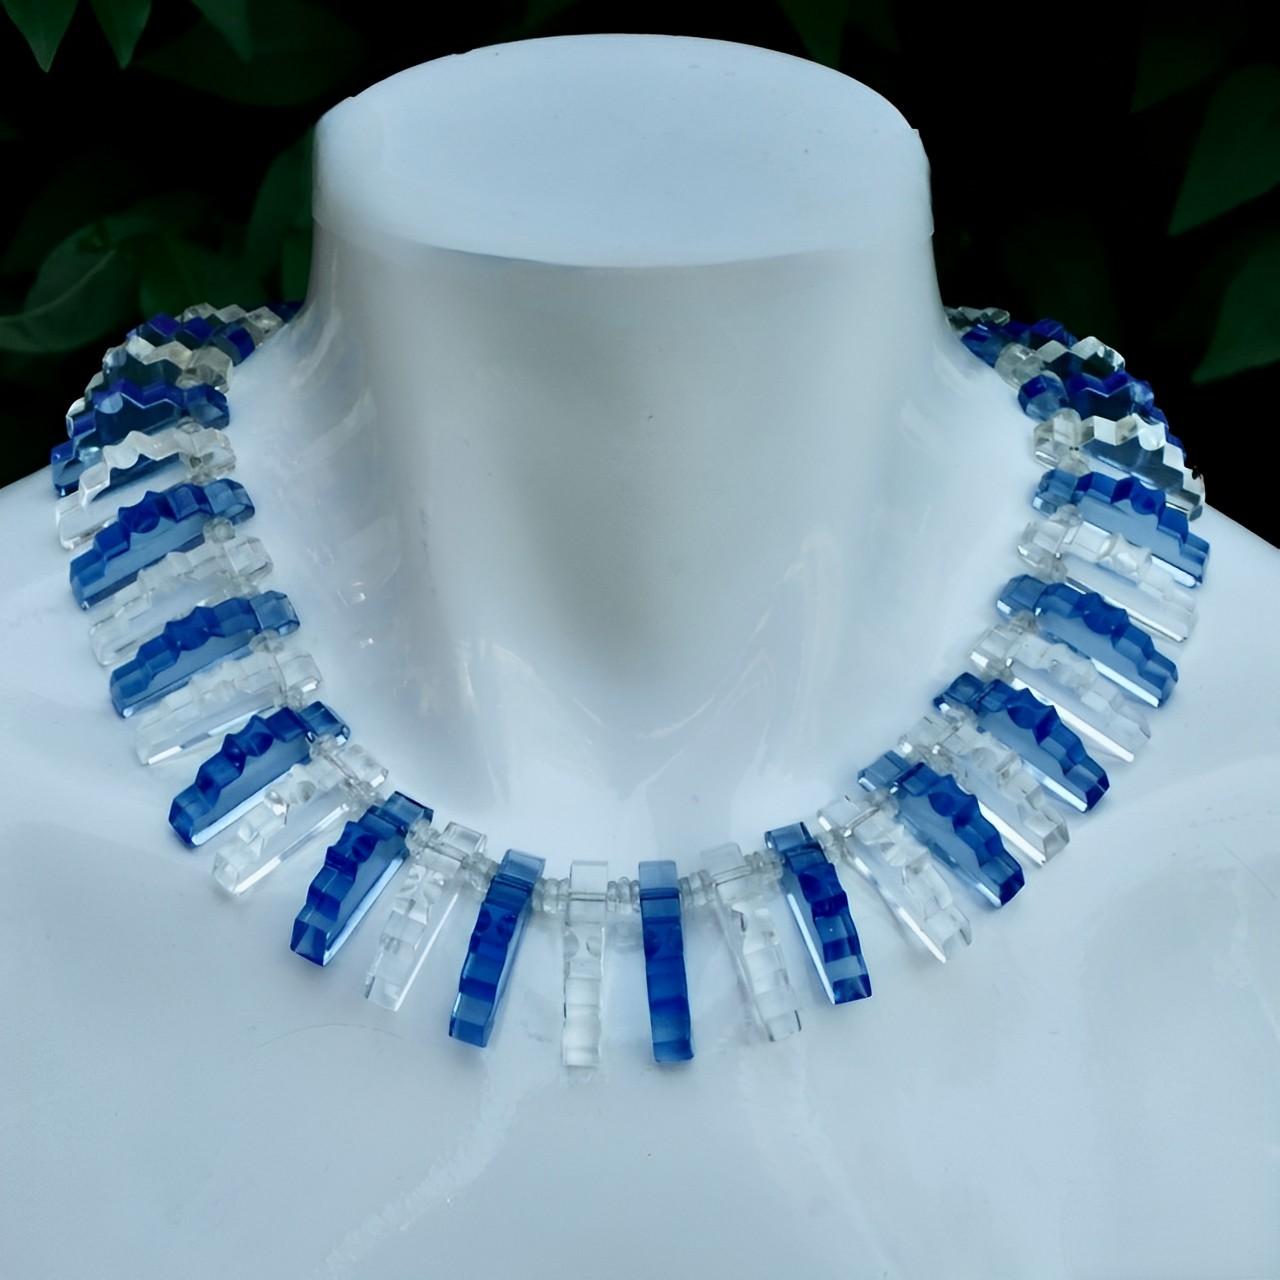 Fabulous Art Deco fringe necklace collar with classic Deco design mid blue and clear glass beads. They are interspersed with three small disc shaped faceted spacer beads.

The beads are strung on to wire, with a silver plated clasp. The necklace